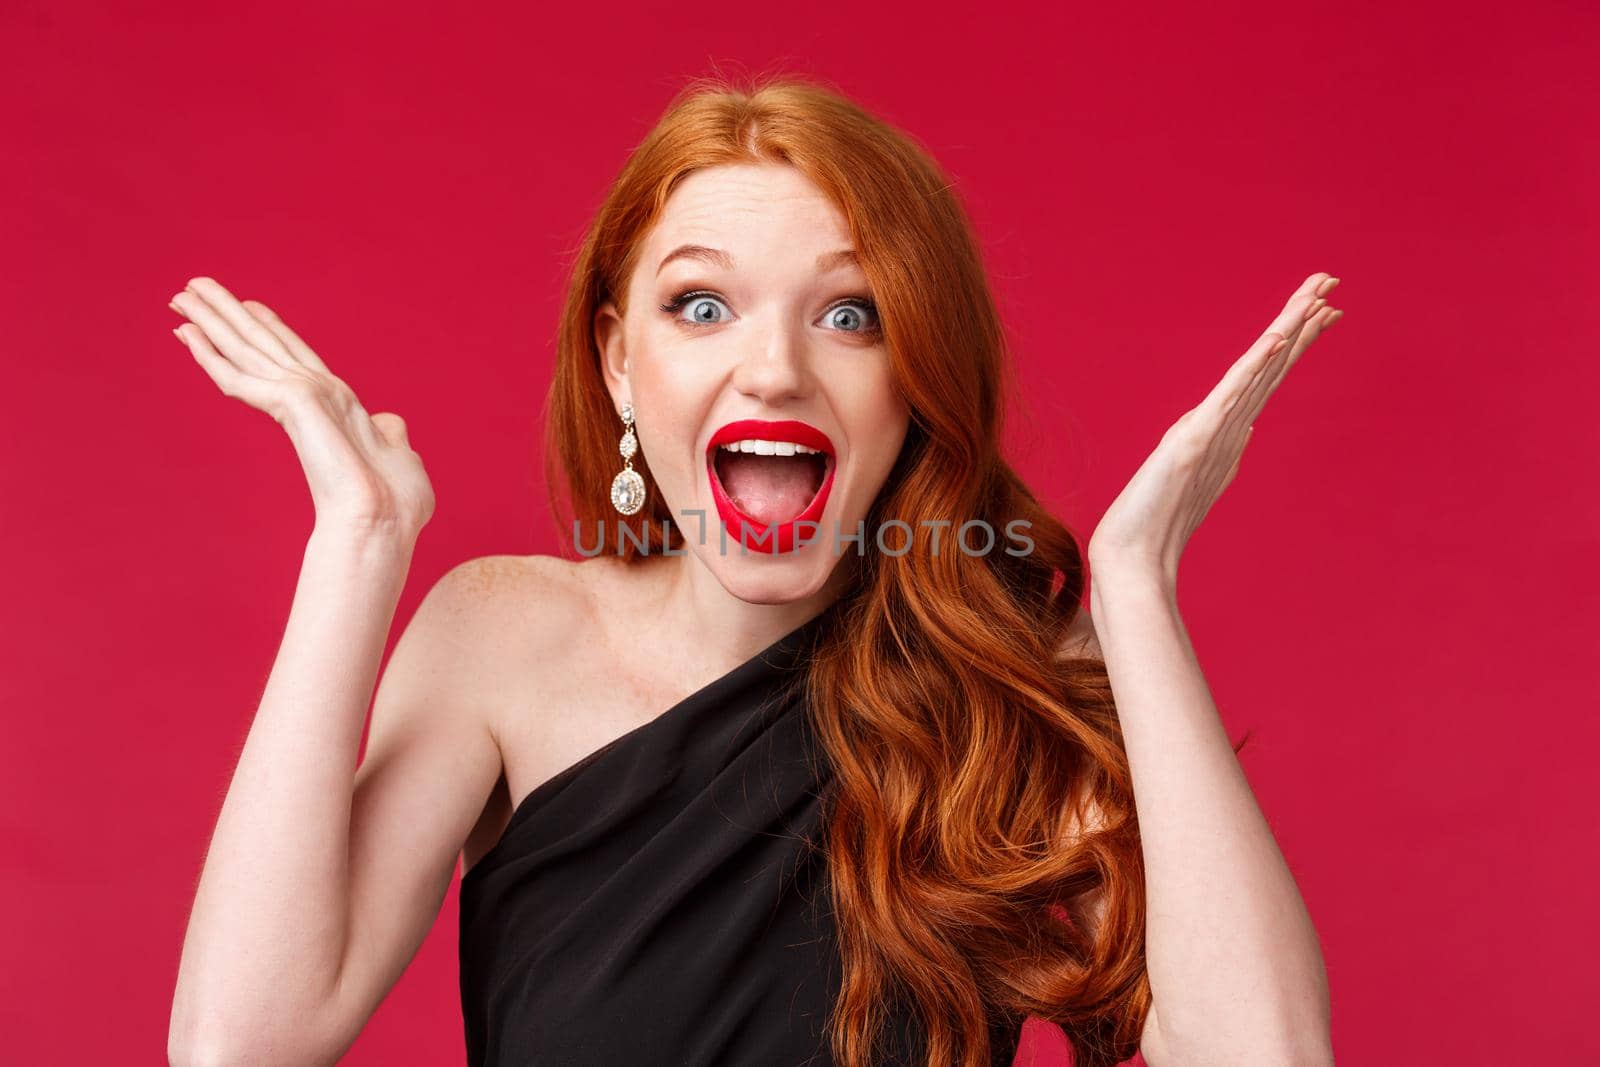 Celebration, emotions and beauty concept. Close-up portrait of happy cheerful redhead woman winning, triumphing over excellent great news, raise hands up and scream joyful, red background.